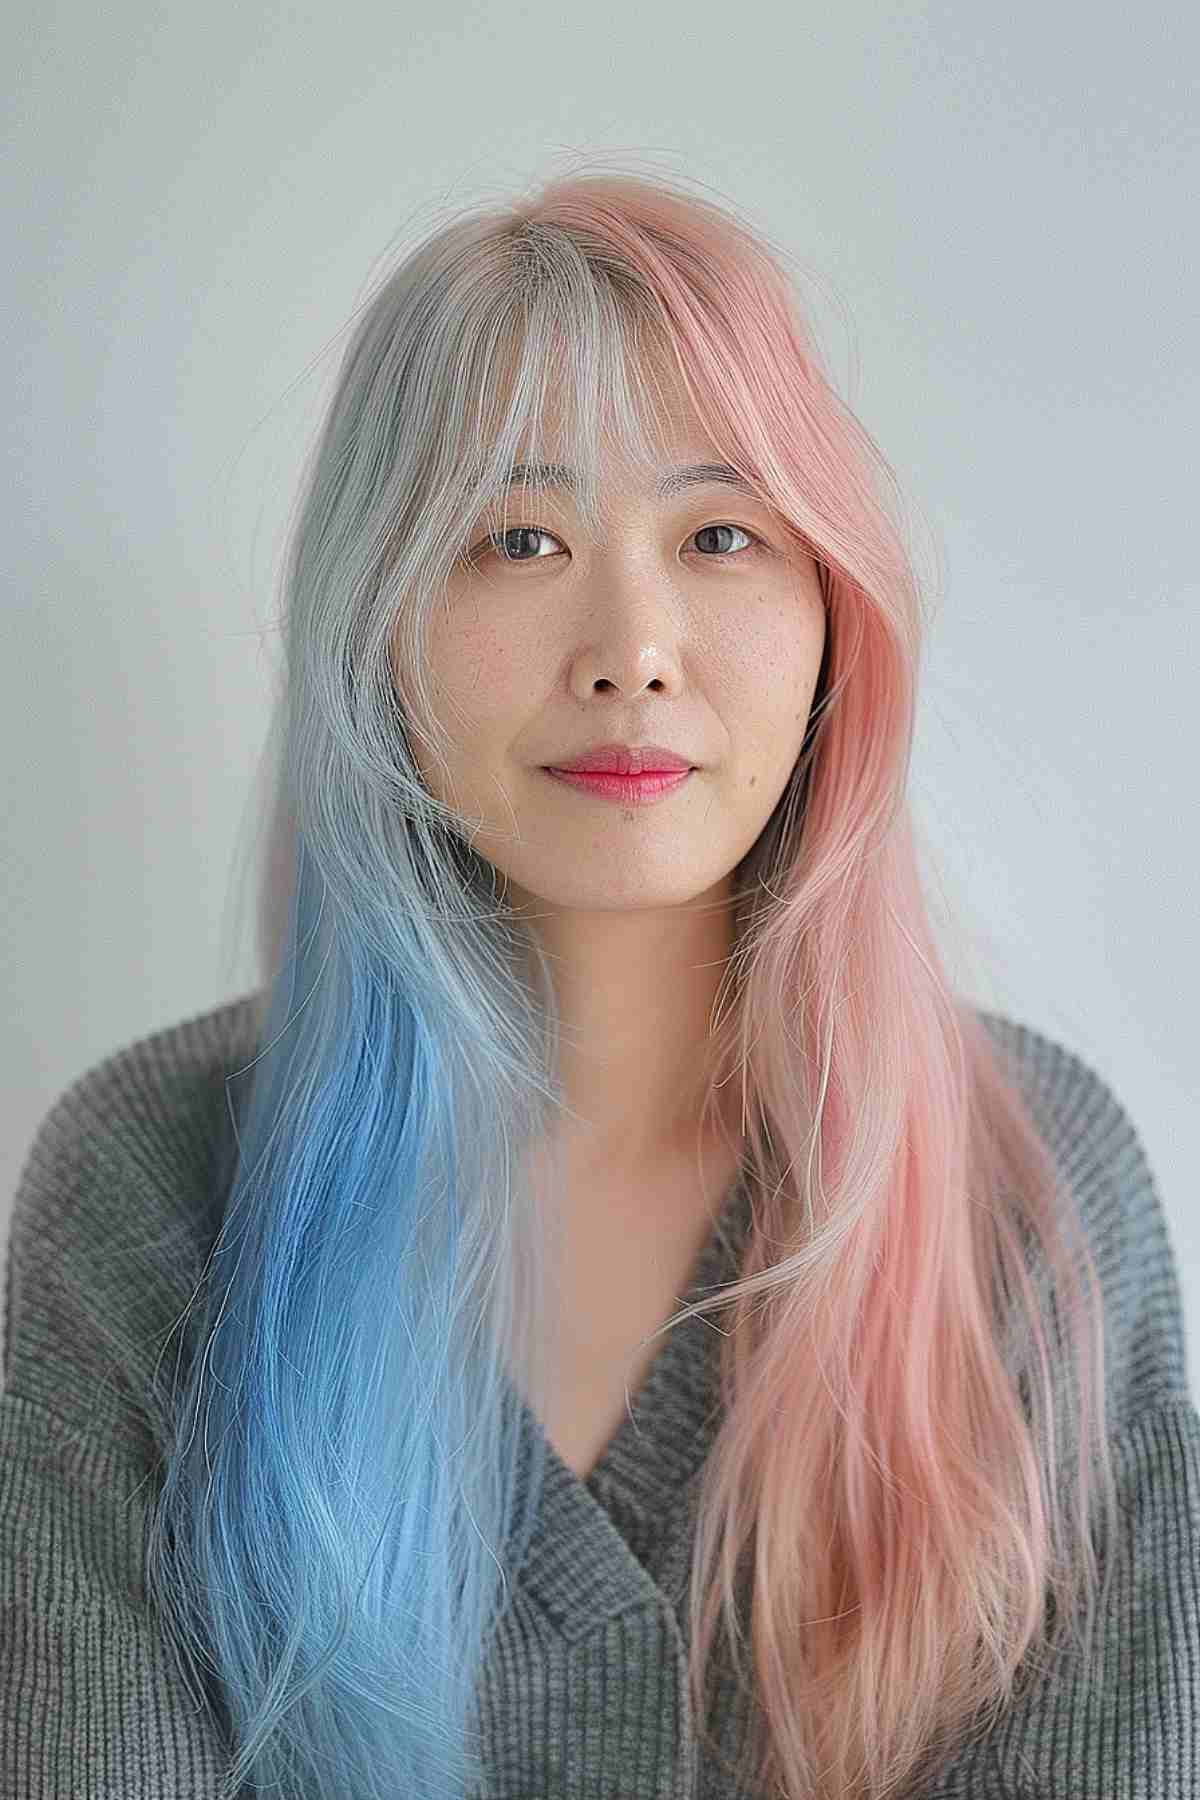 Mid-length wavy hair with pastel pink and blue shades, capturing the playful Gemini essence.